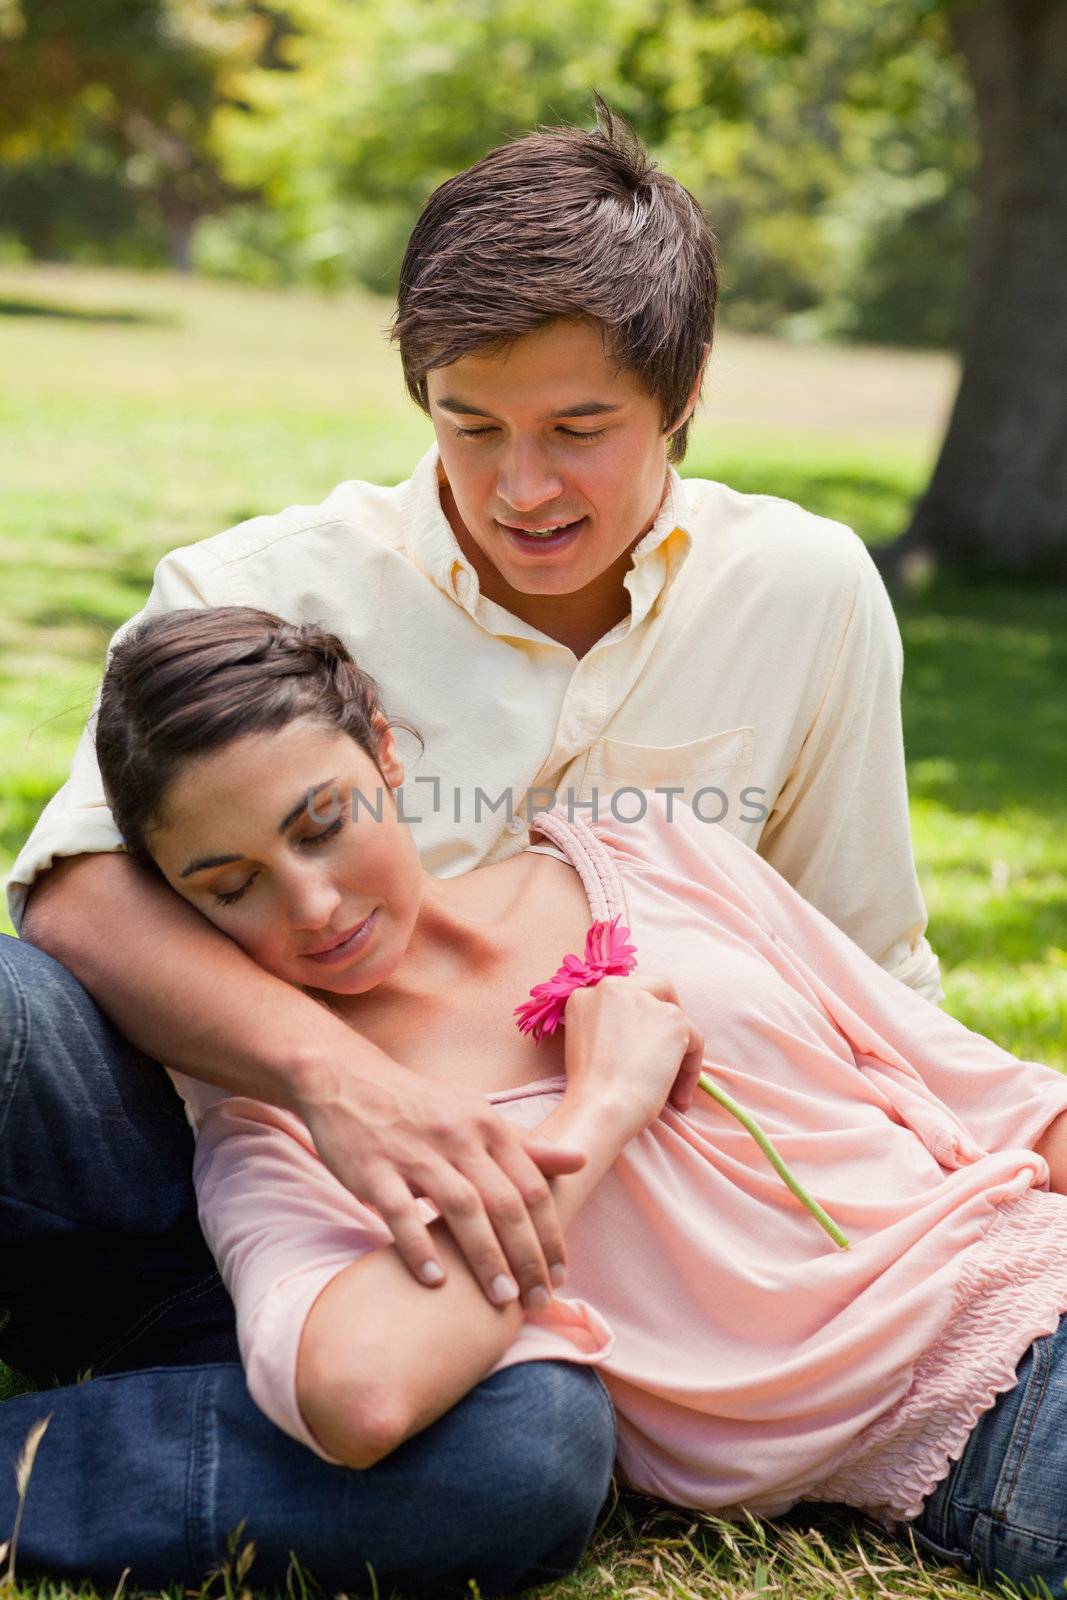 Man smiling as he looks at his friend who is lying against him as he is sitting down on the grass